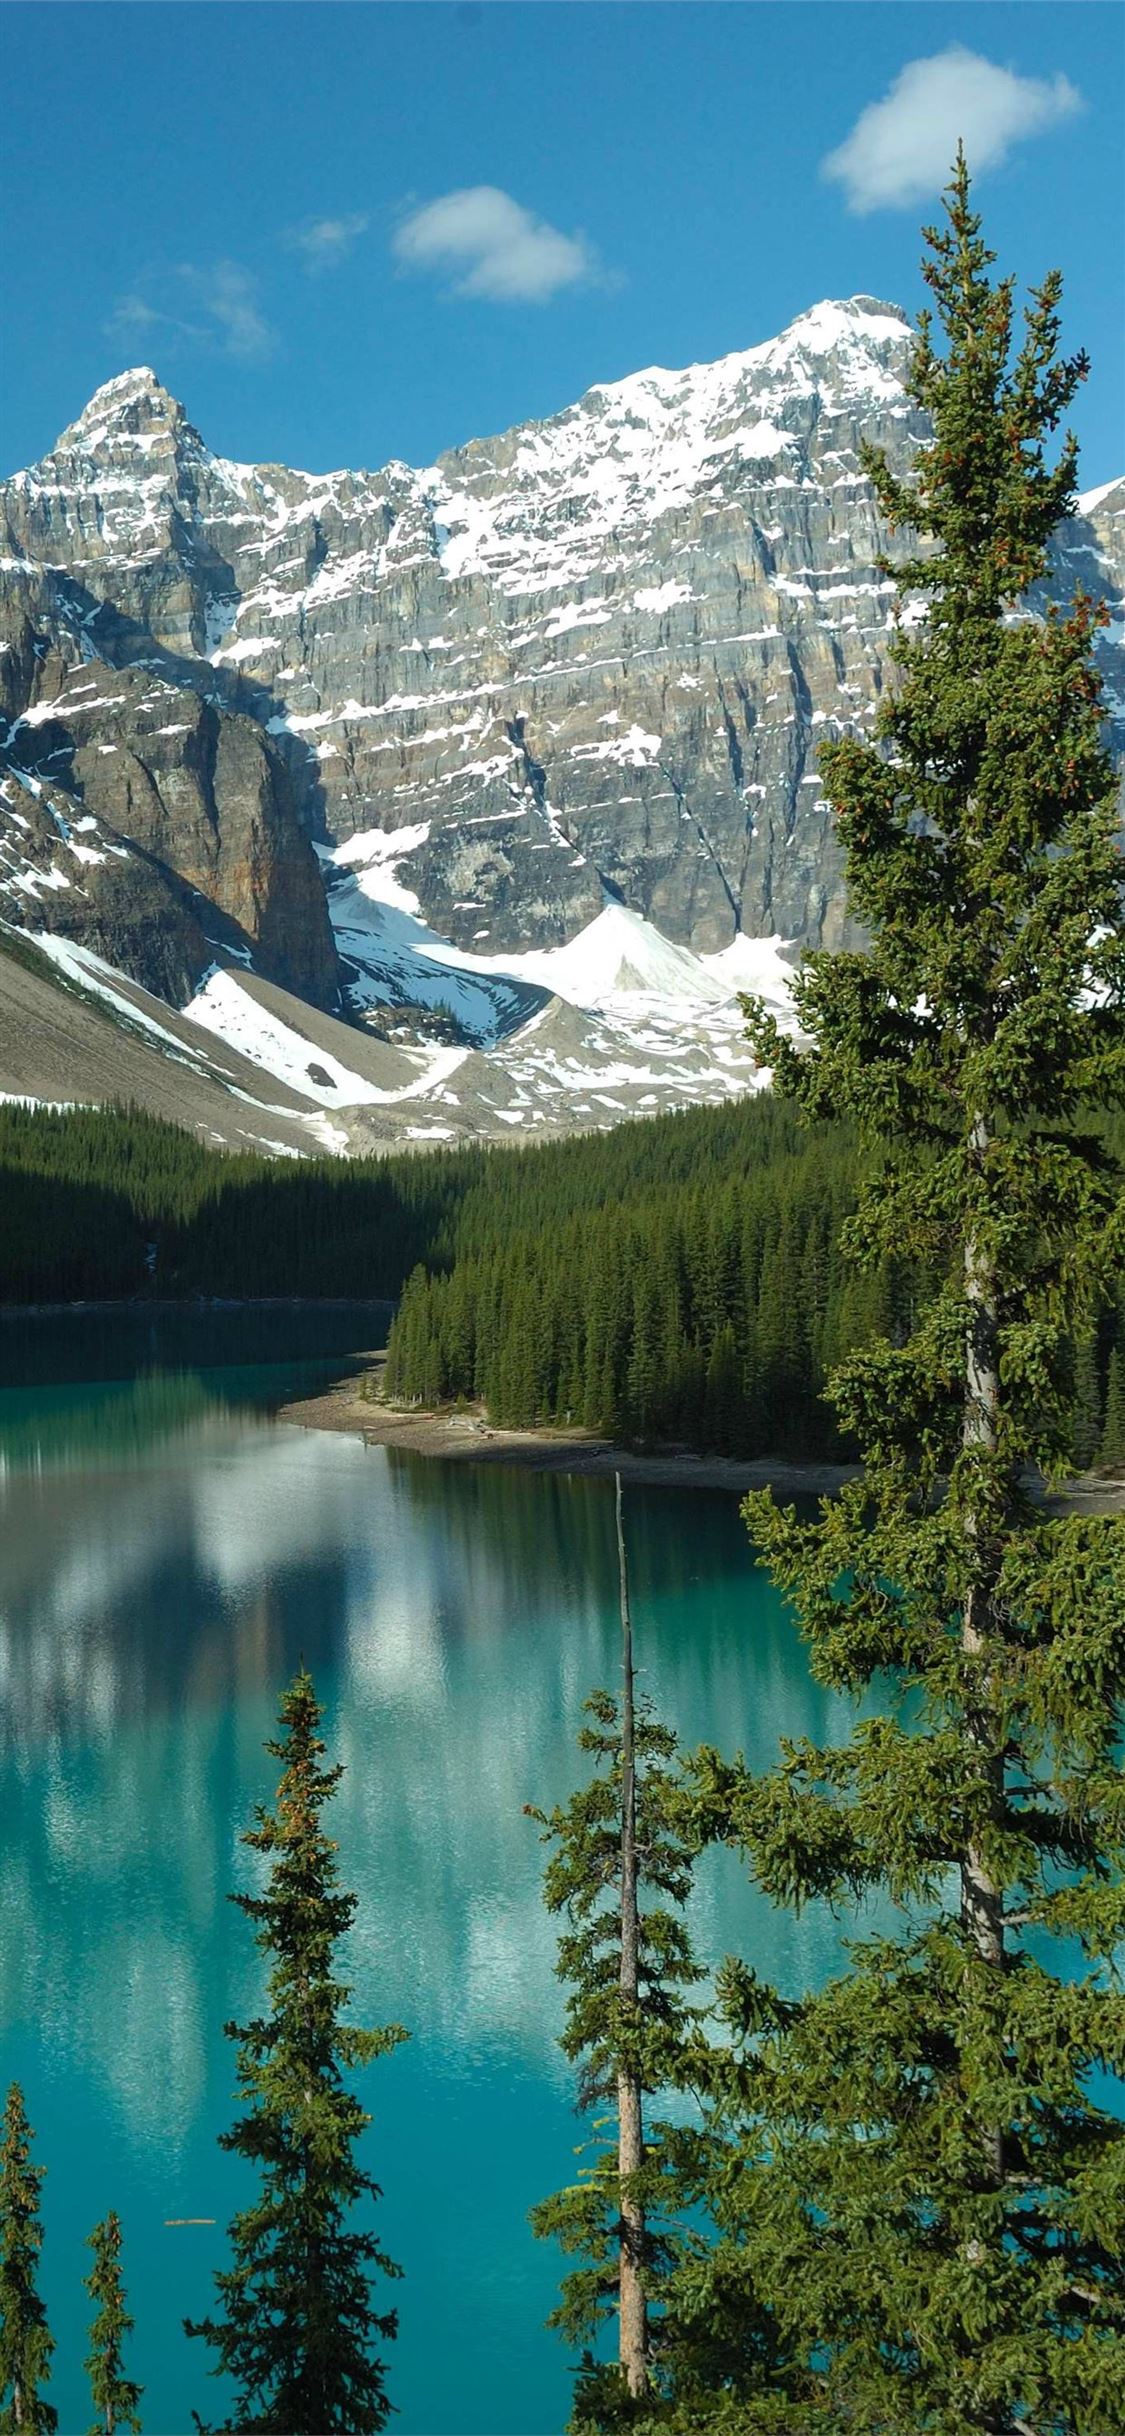 Moraine Lake South Channel Wallpapers Wallpaper Cave